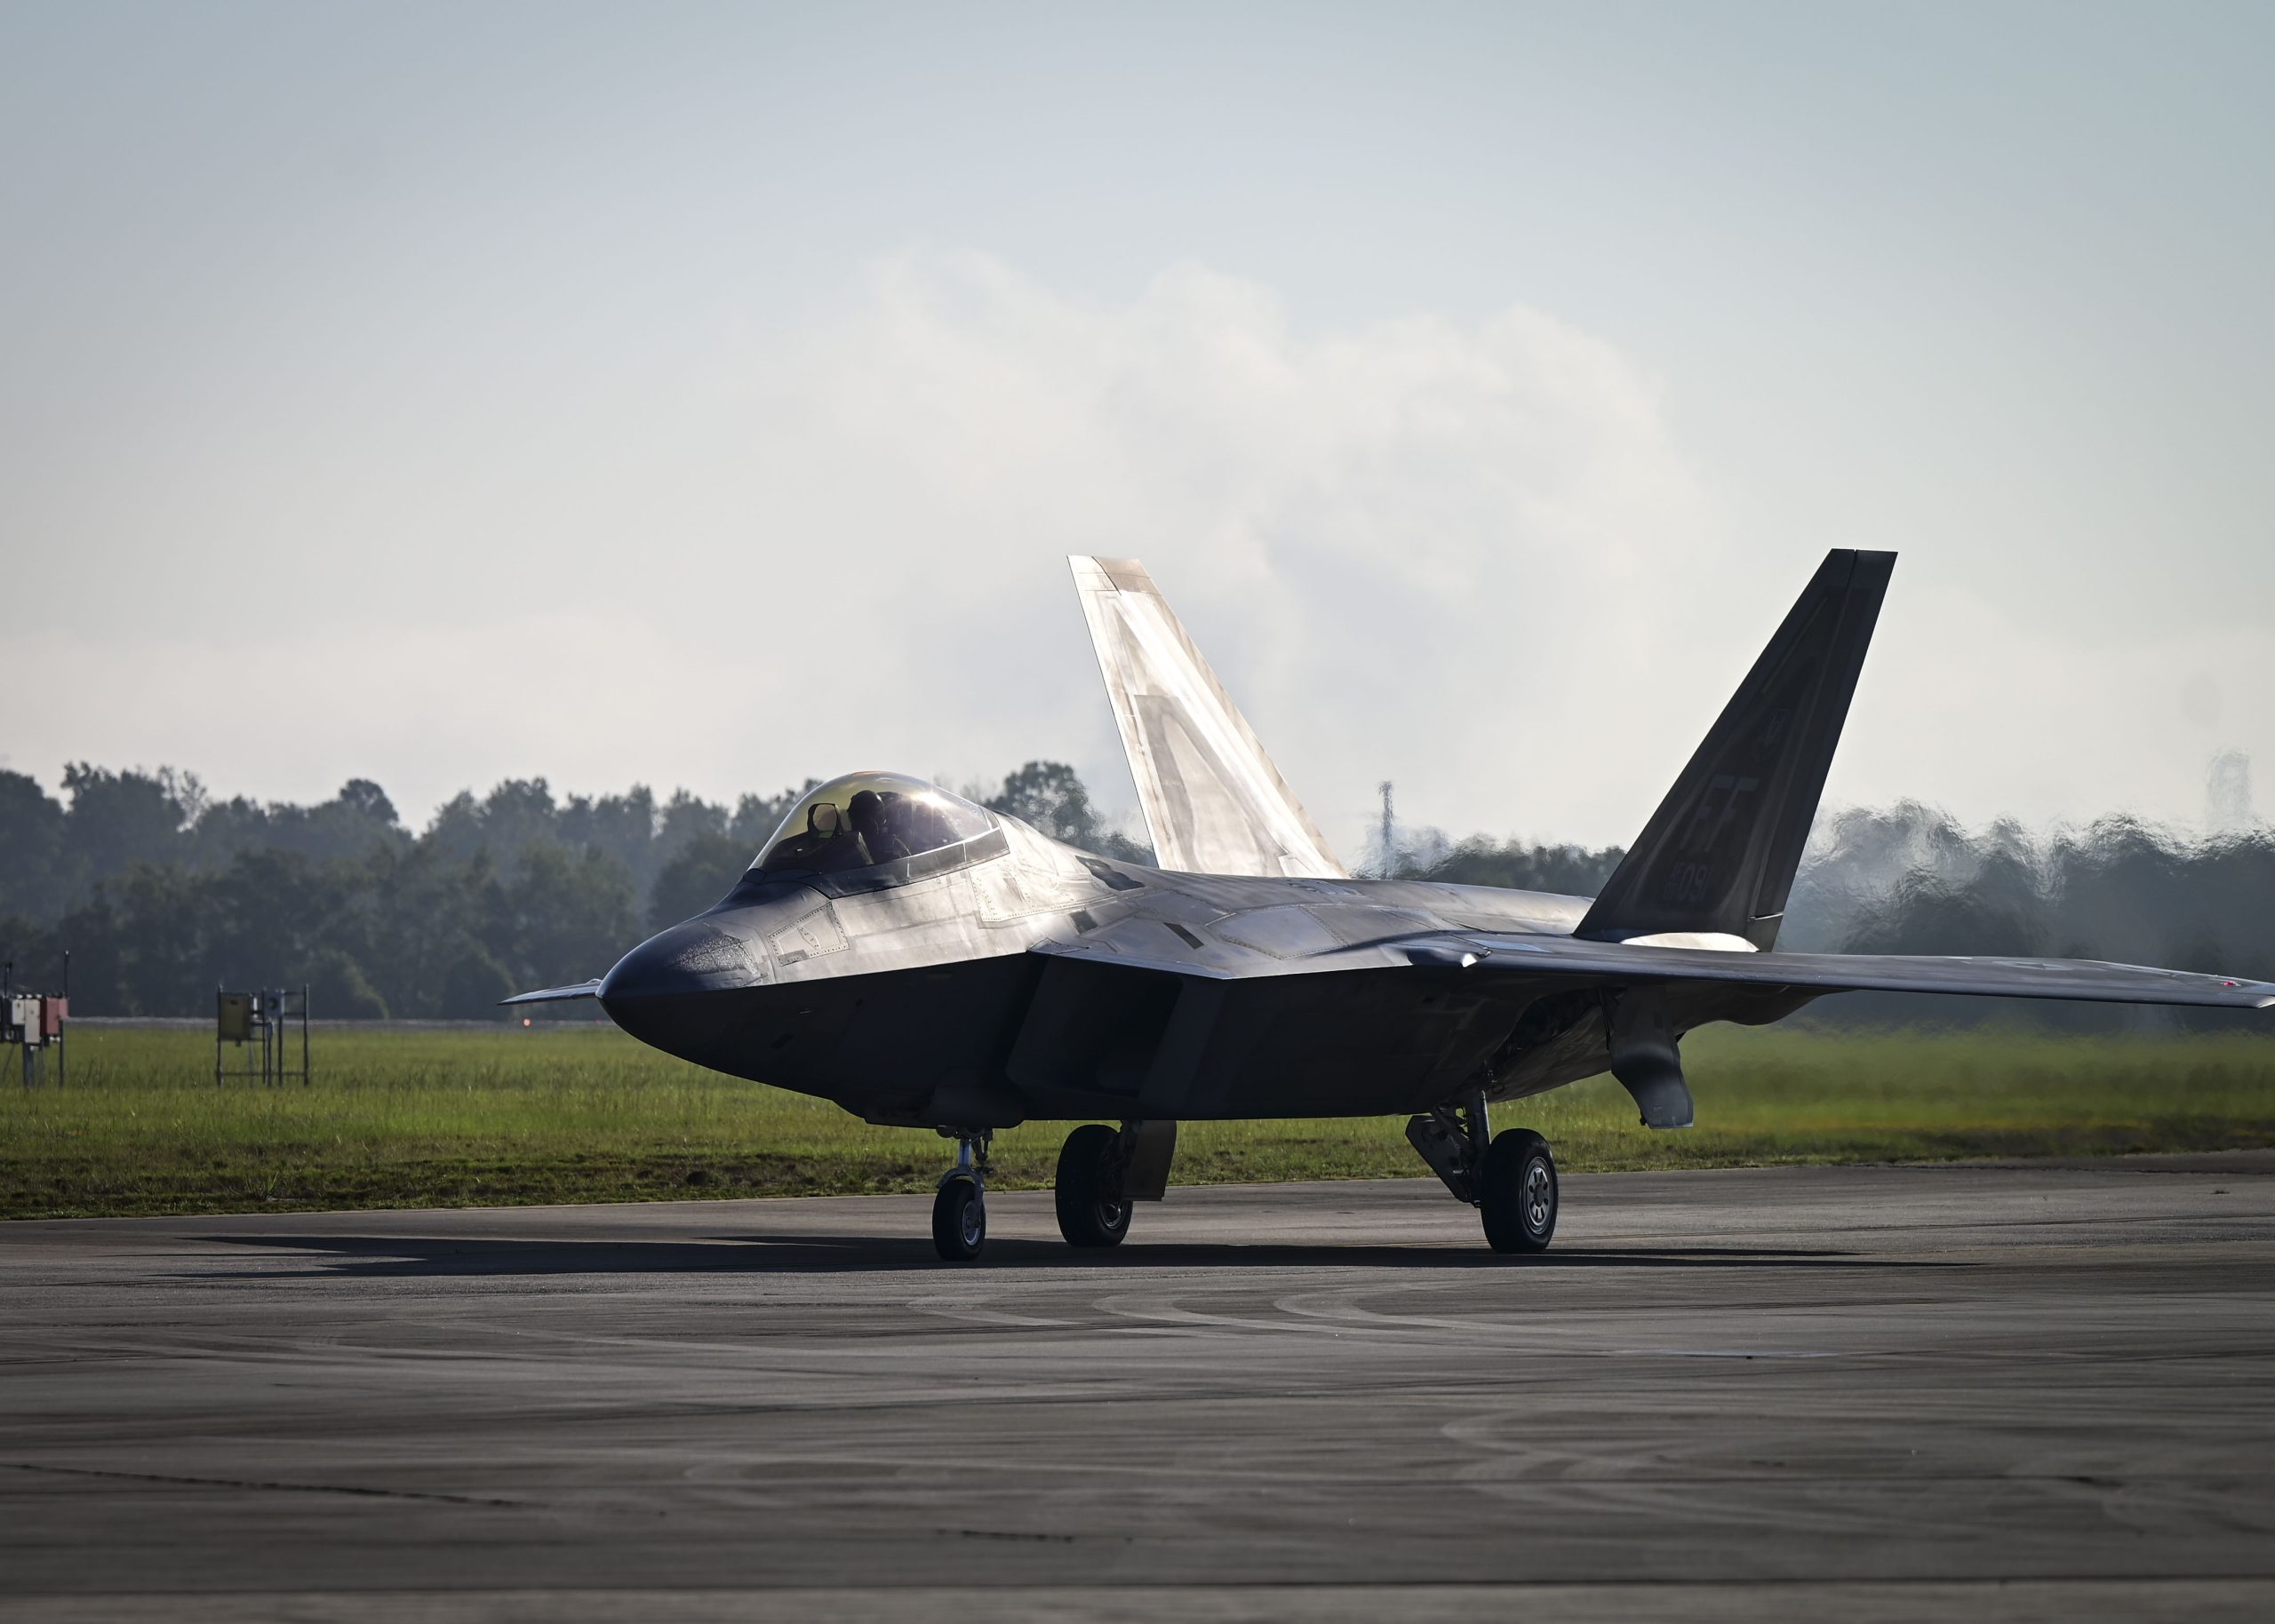 Pilot Unharmed After F-22 Mishap in Georgia